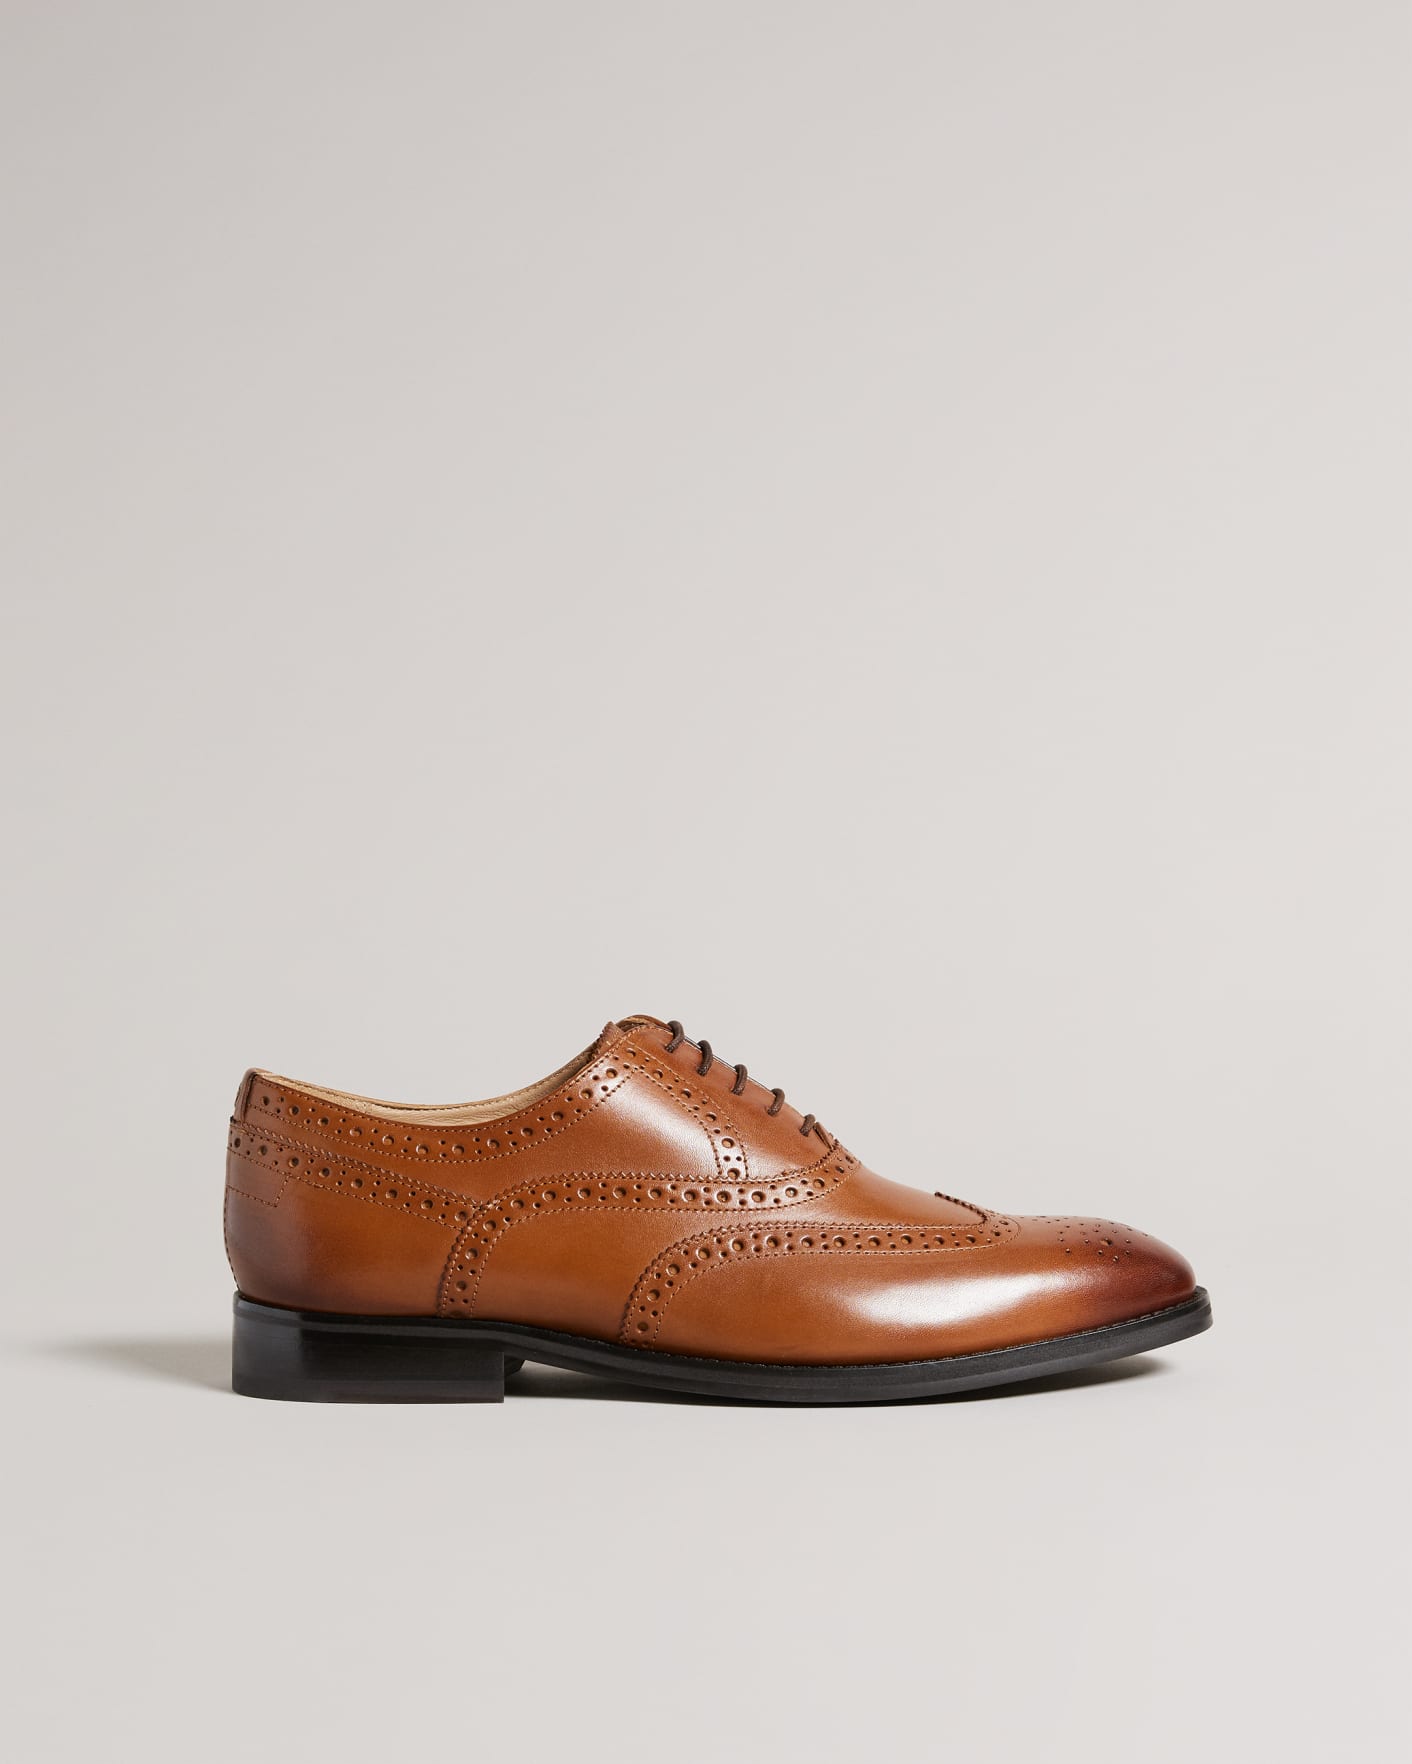 Ted Baker Amai Formal Leather Brogue Shoes in Tan Mens Shoes Lace-ups Brogues Brown for Men 